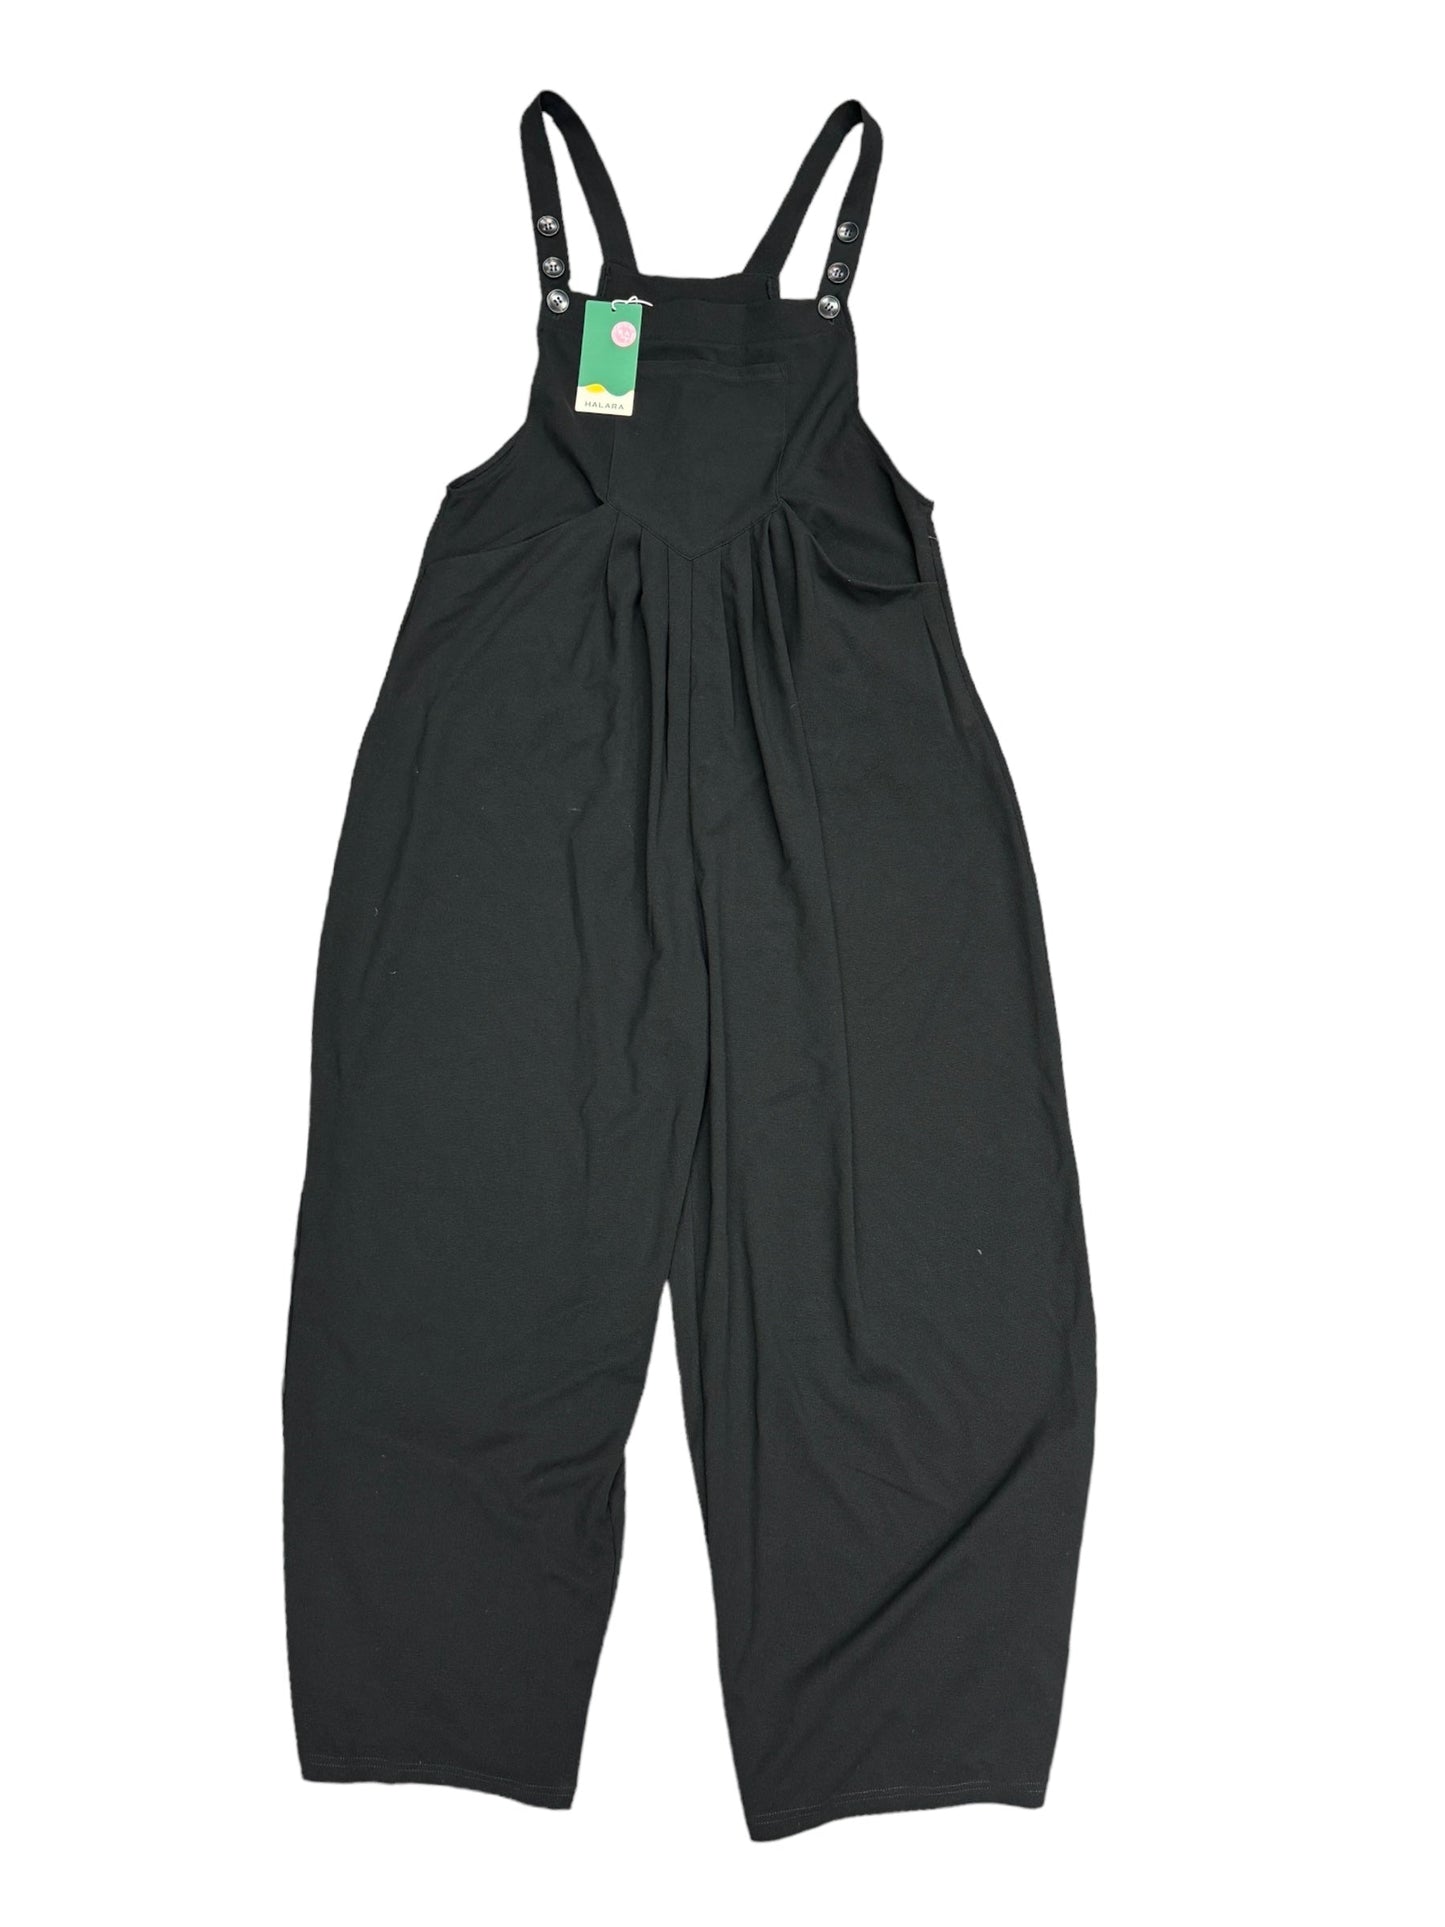 Black Overalls Clothes Mentor, Size 12